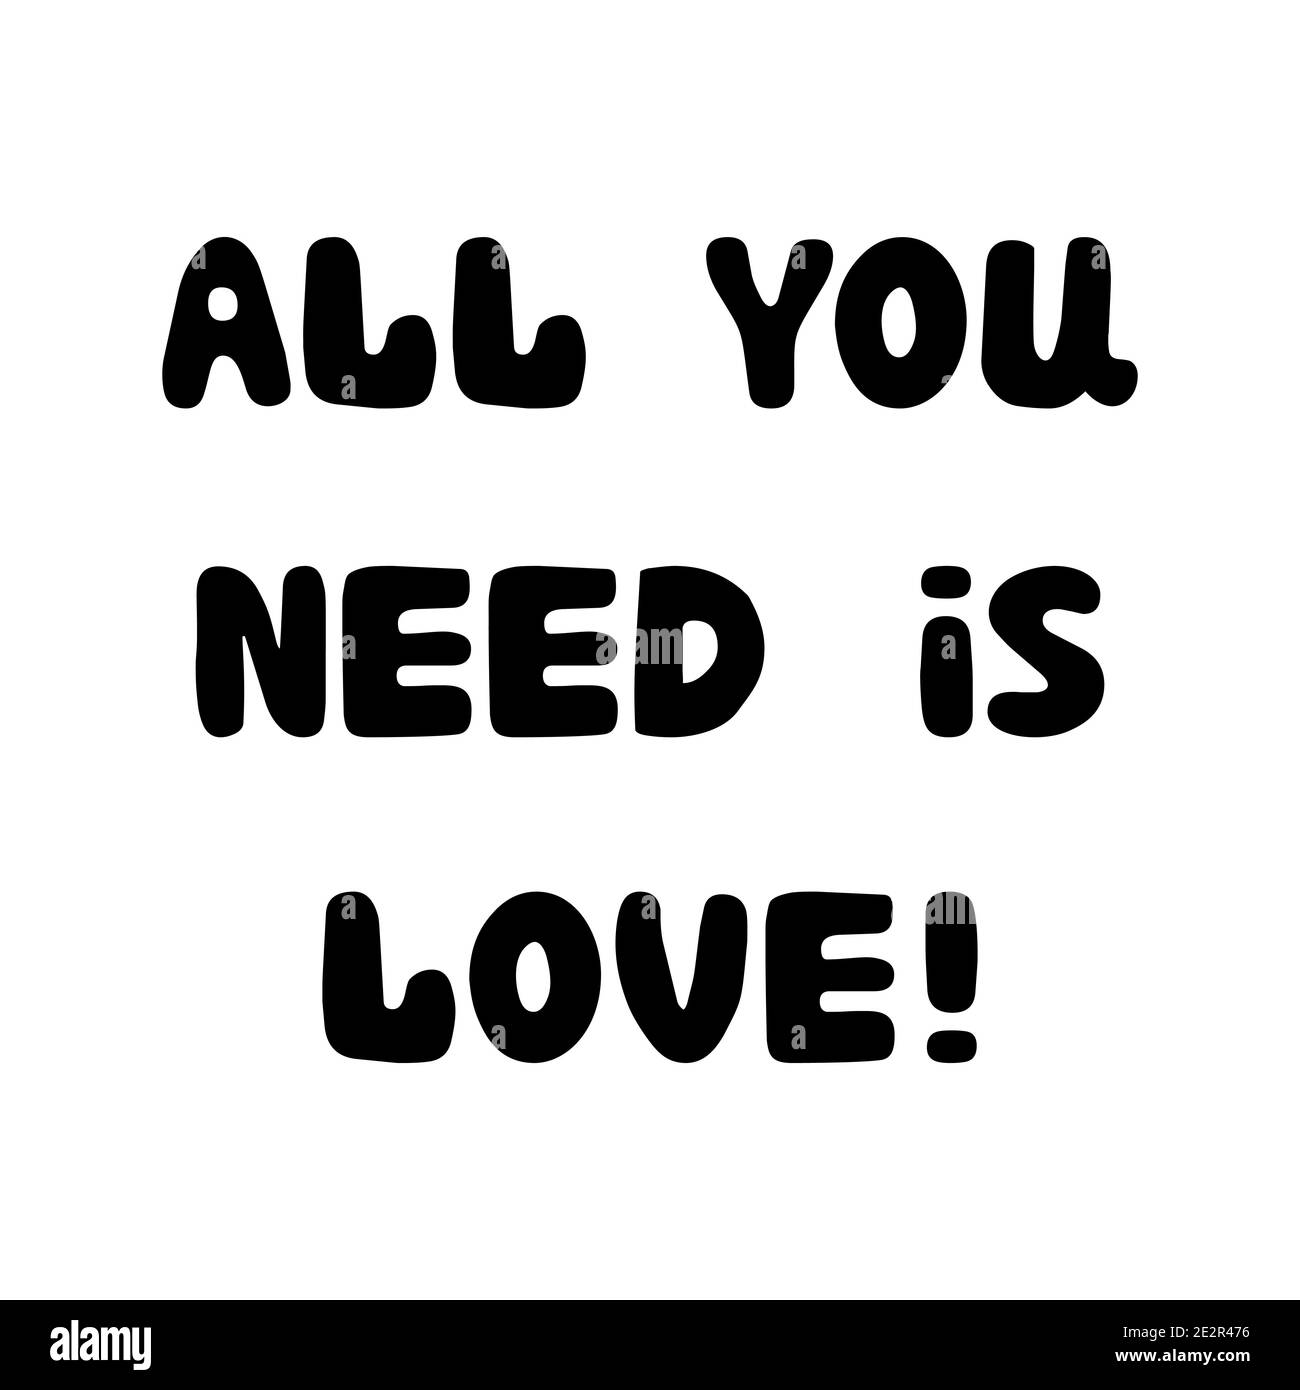 https://c8.alamy.com/comp/2E2R476/all-you-need-is-love-handwritten-roundish-lettering-isolated-on-a-white-background-2E2R476.jpg